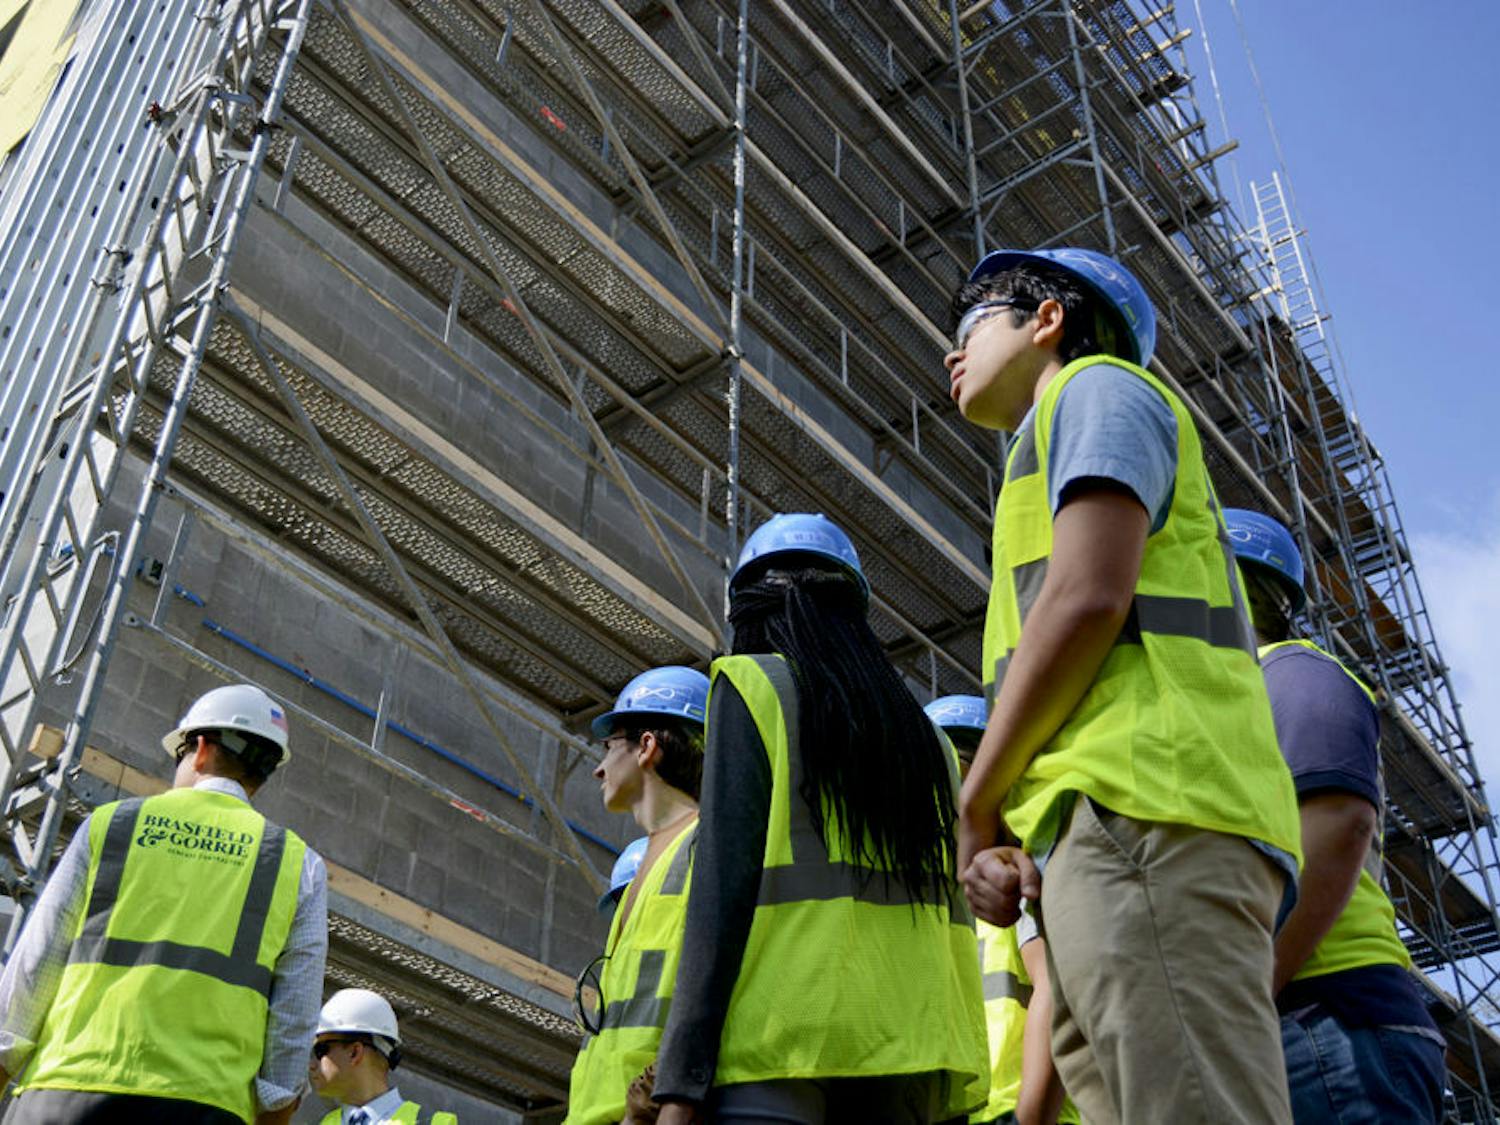 Sean Parker (right), a 20-year-old UF economics sophomore, joins the rest of a tour group viewing the Infinity Hall construction site Tuesday afternoon. A student enrolled in the Innovation Academy, Parker said he was interested in the possibility of living in Infinity Hall next fall.